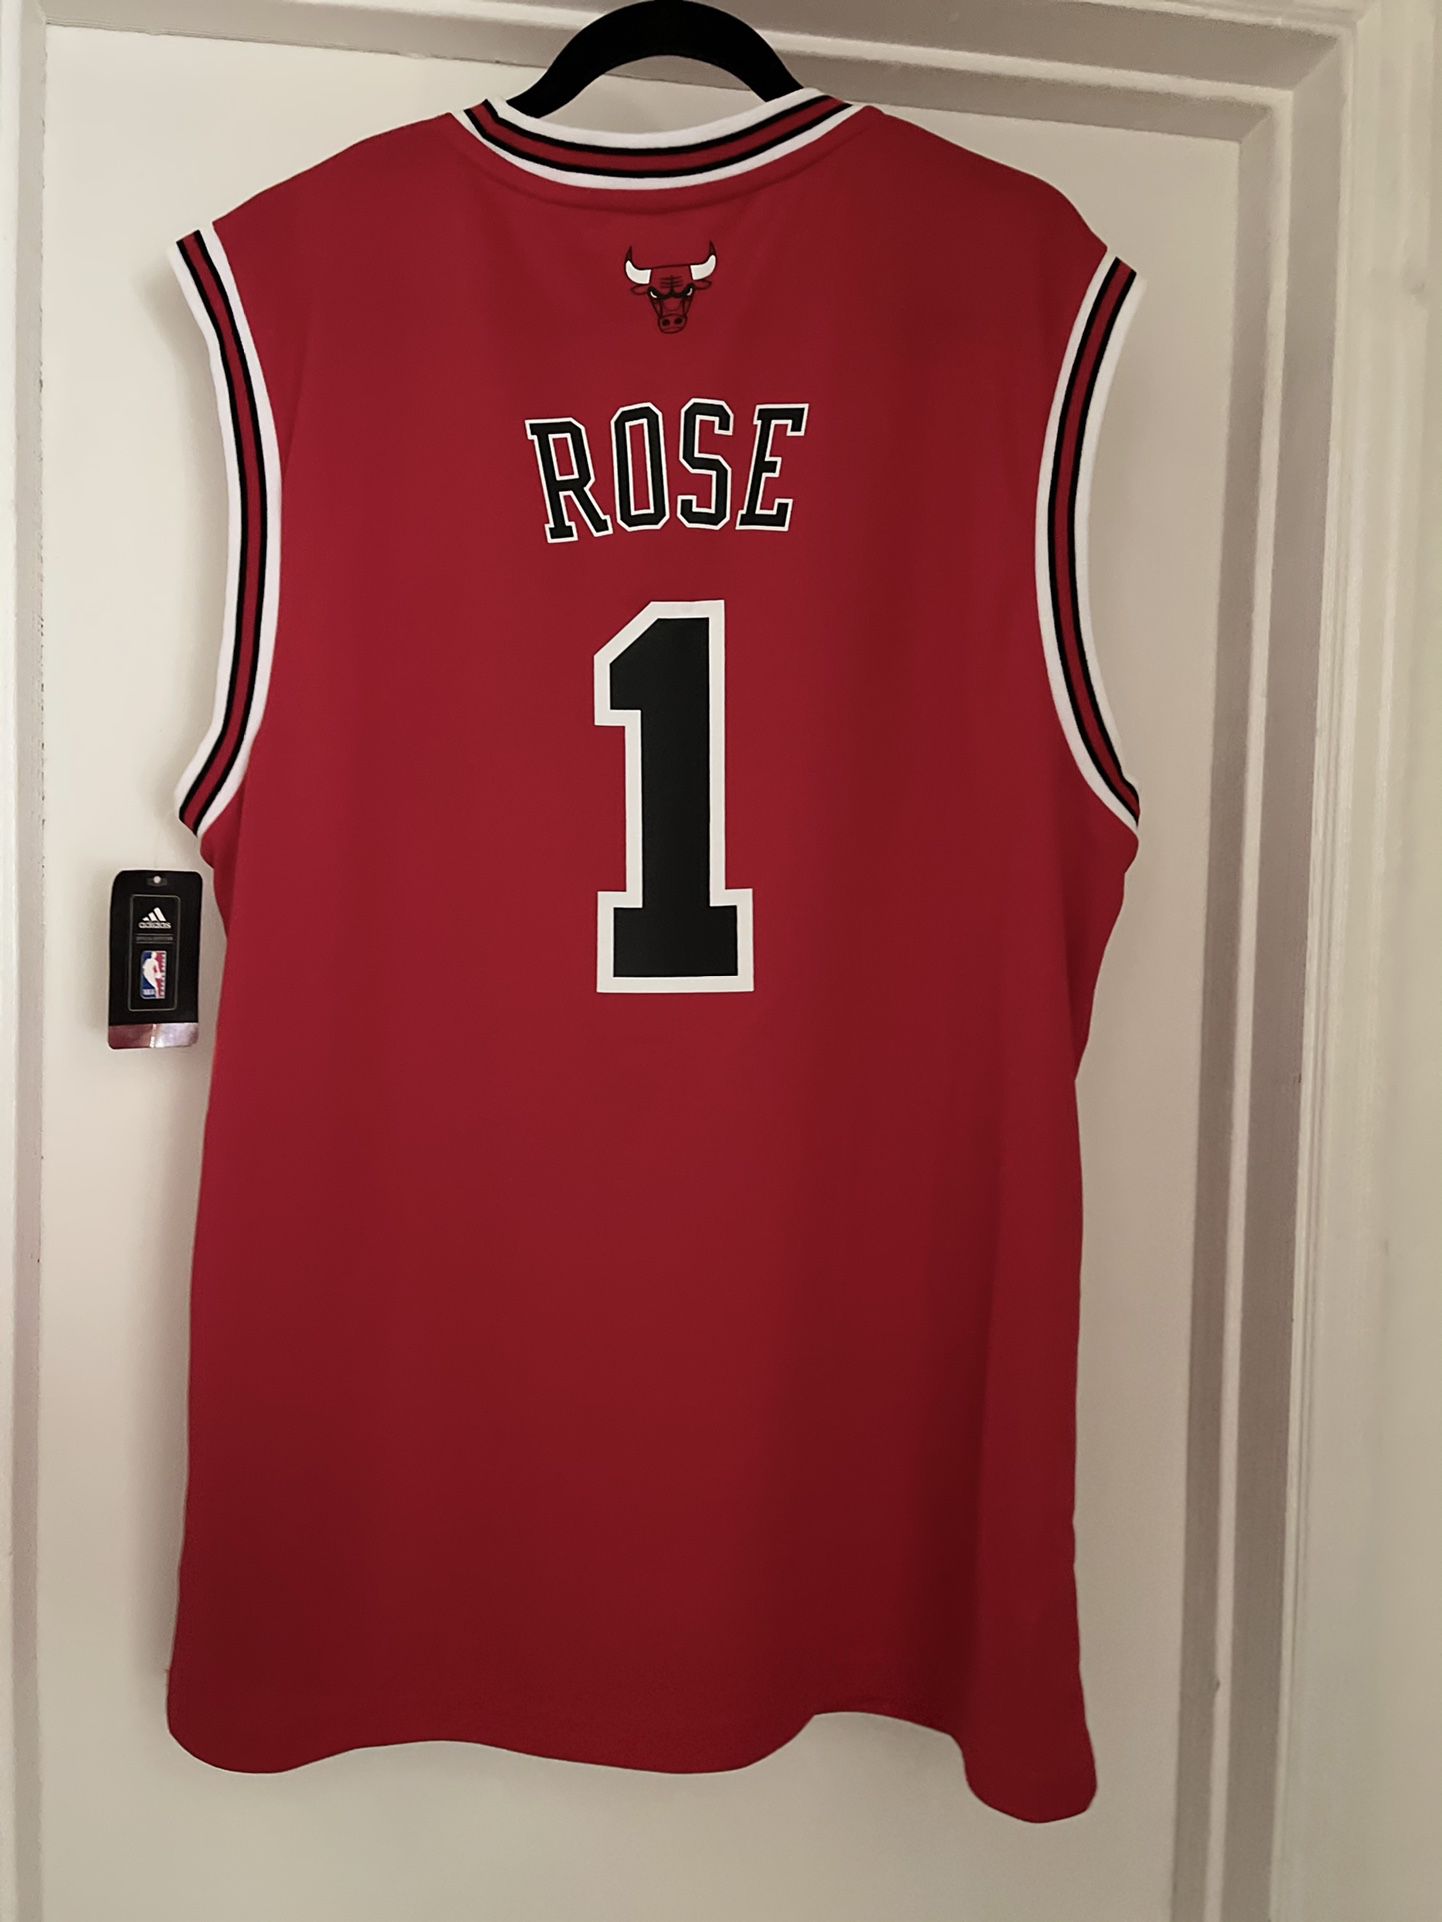 Derrick Rose #1 Chicago Bulls NBA Basketball Jersey Adidas Youth Large  Length +2 for Sale in Davenport, FL - OfferUp